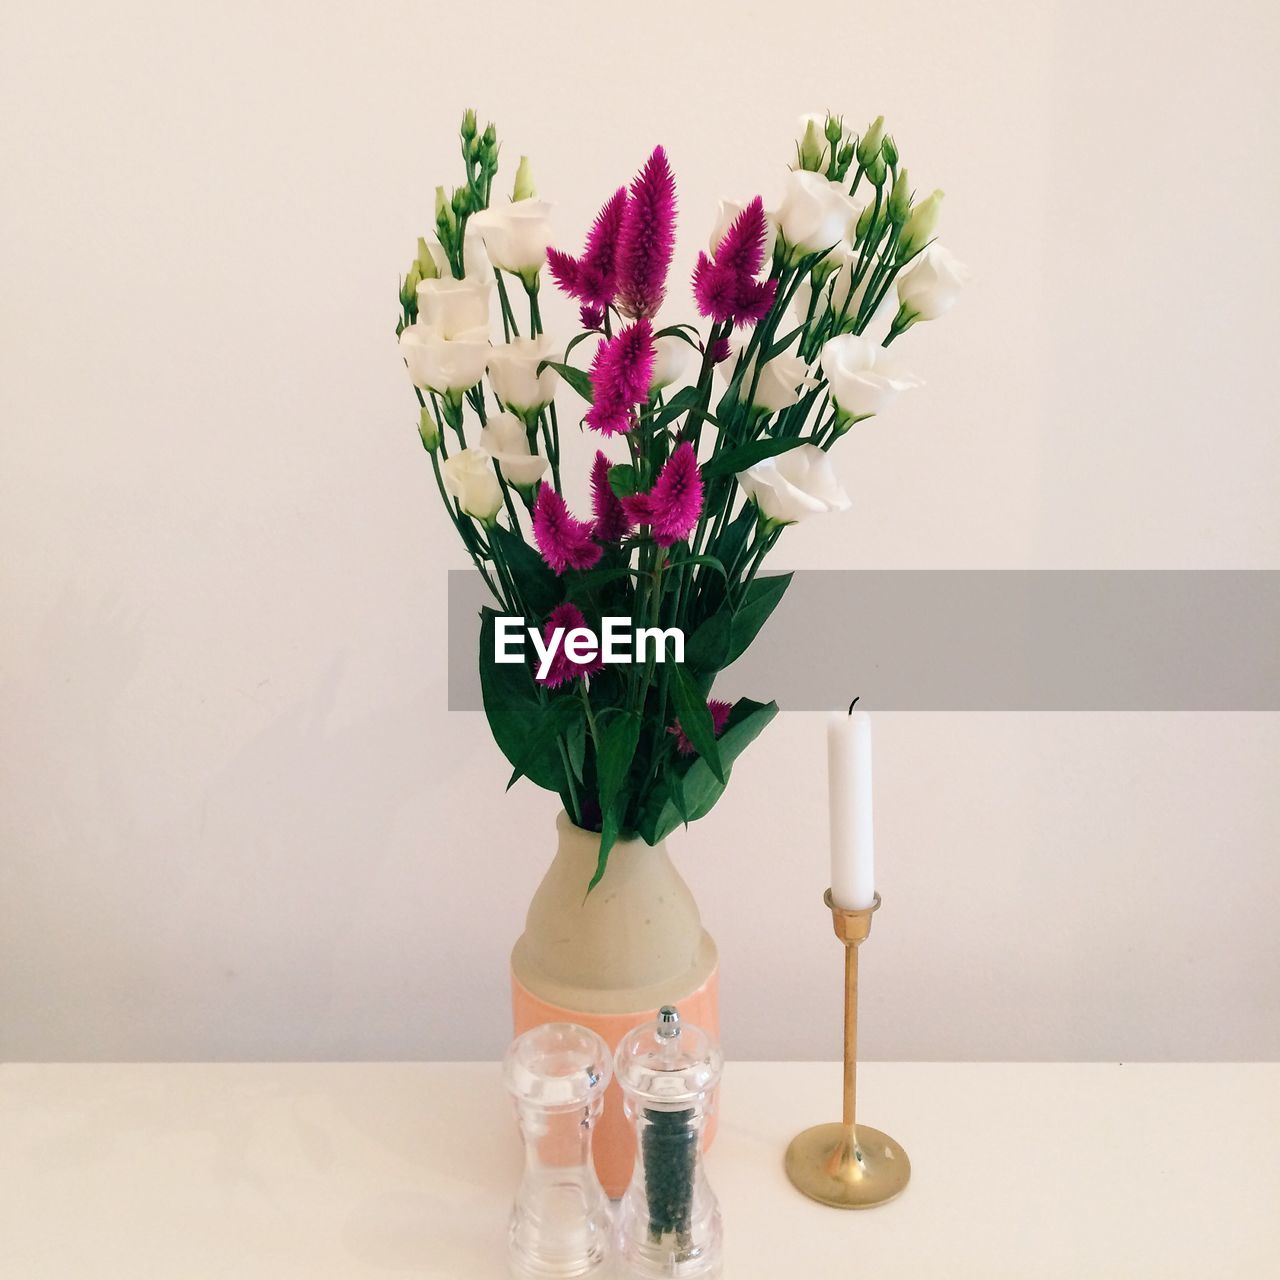 Flower vase and candle on table against white wall